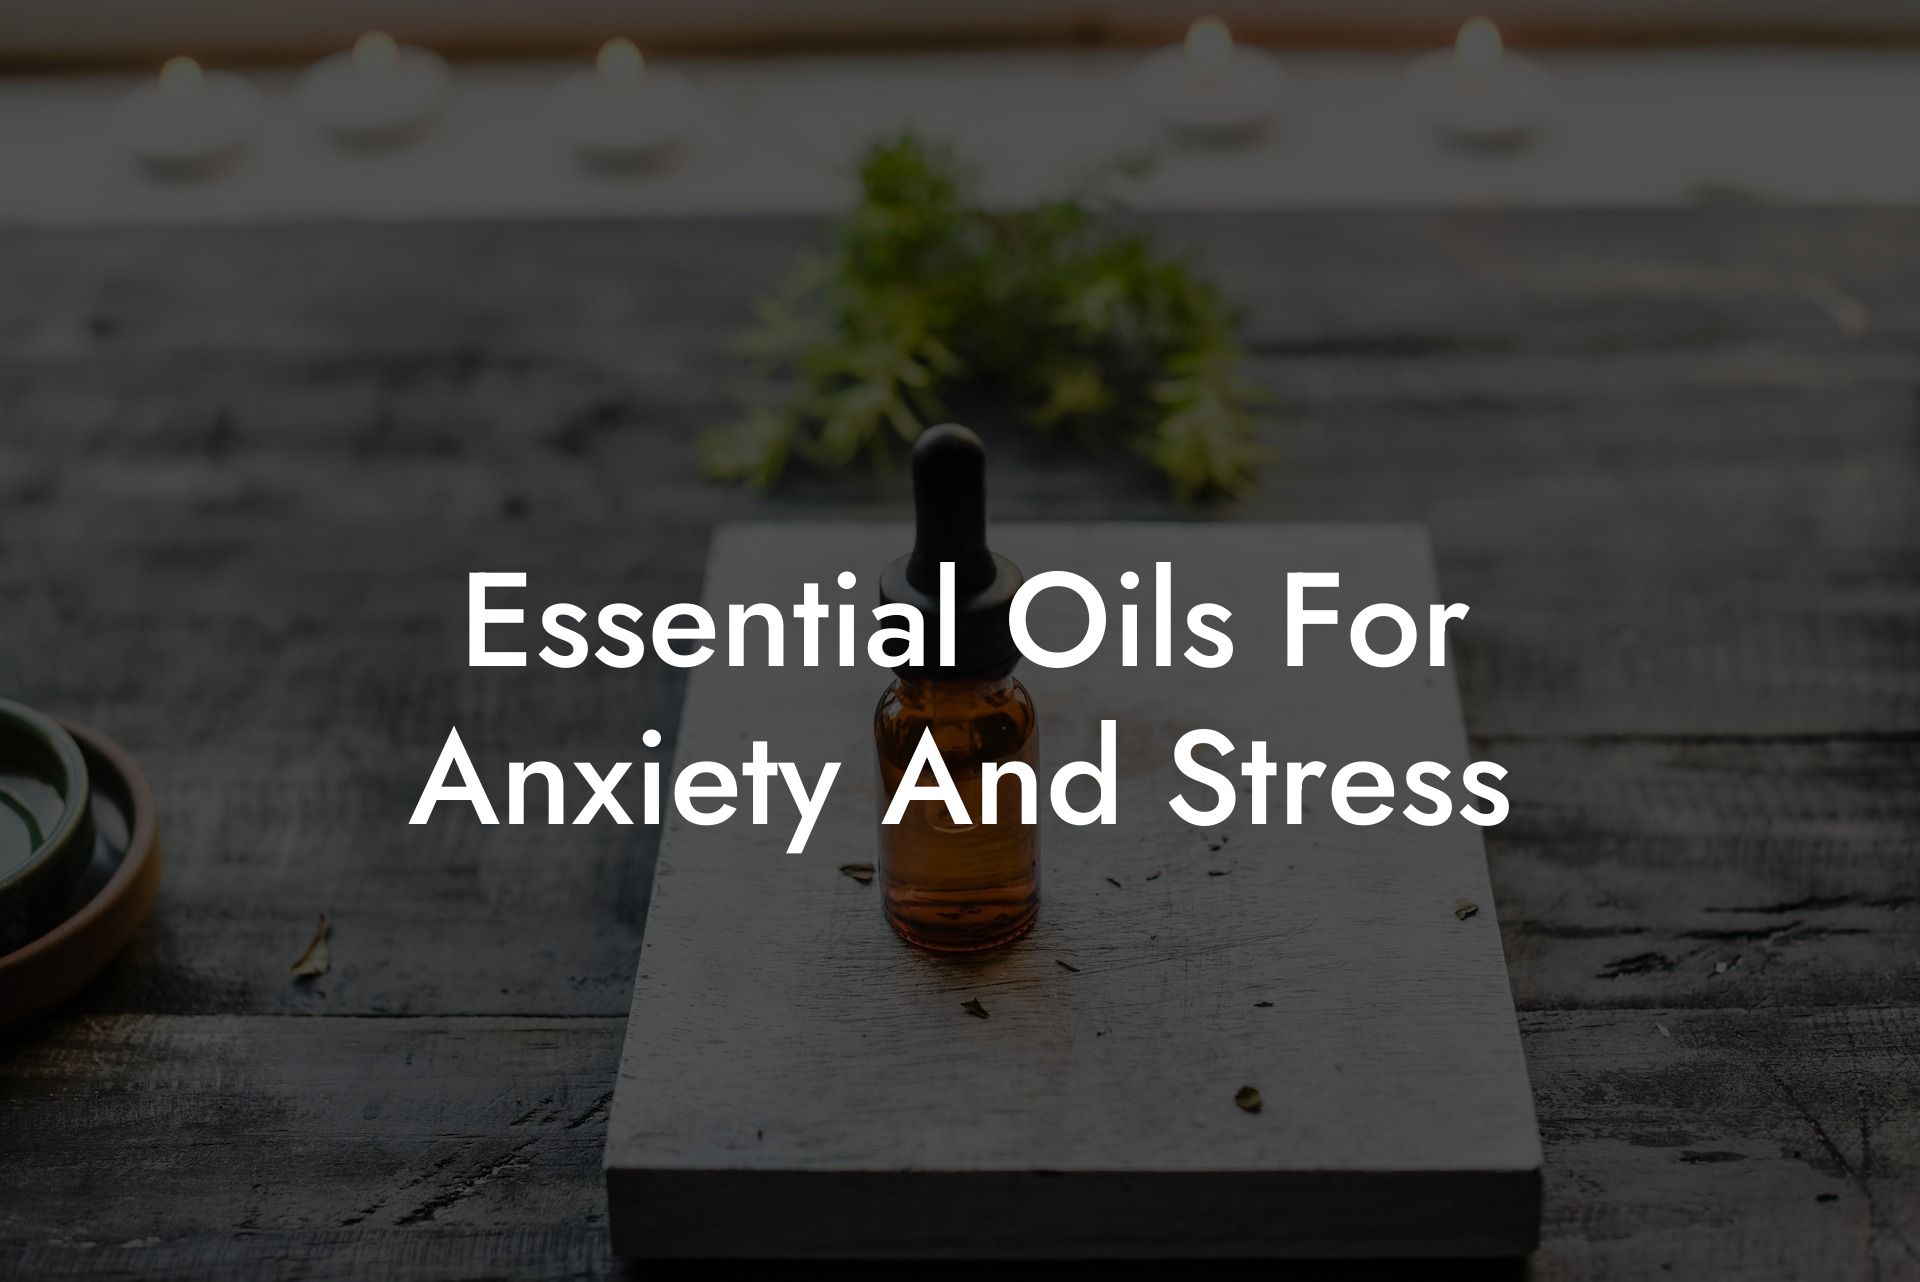 Essential Oils For Anxiety And Stress